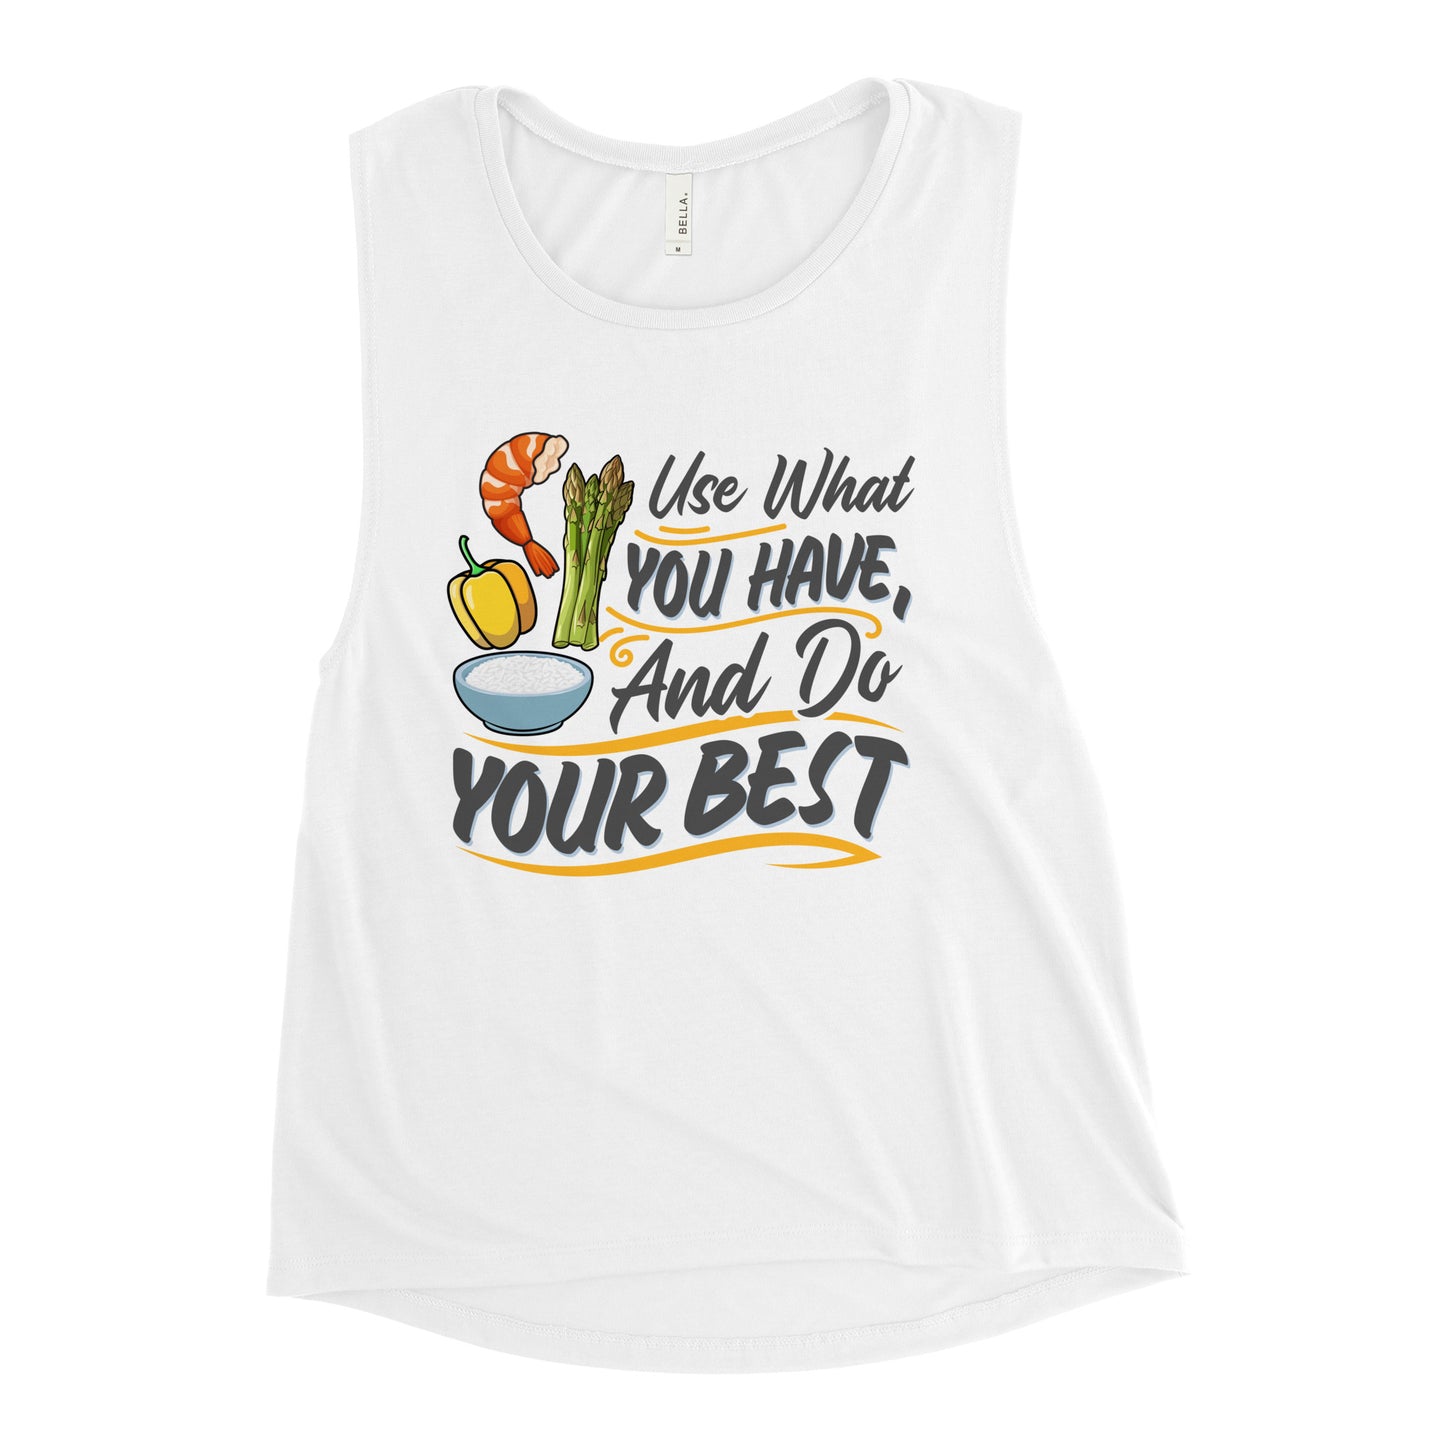 Do Your Best Ladies’ Muscle Tank